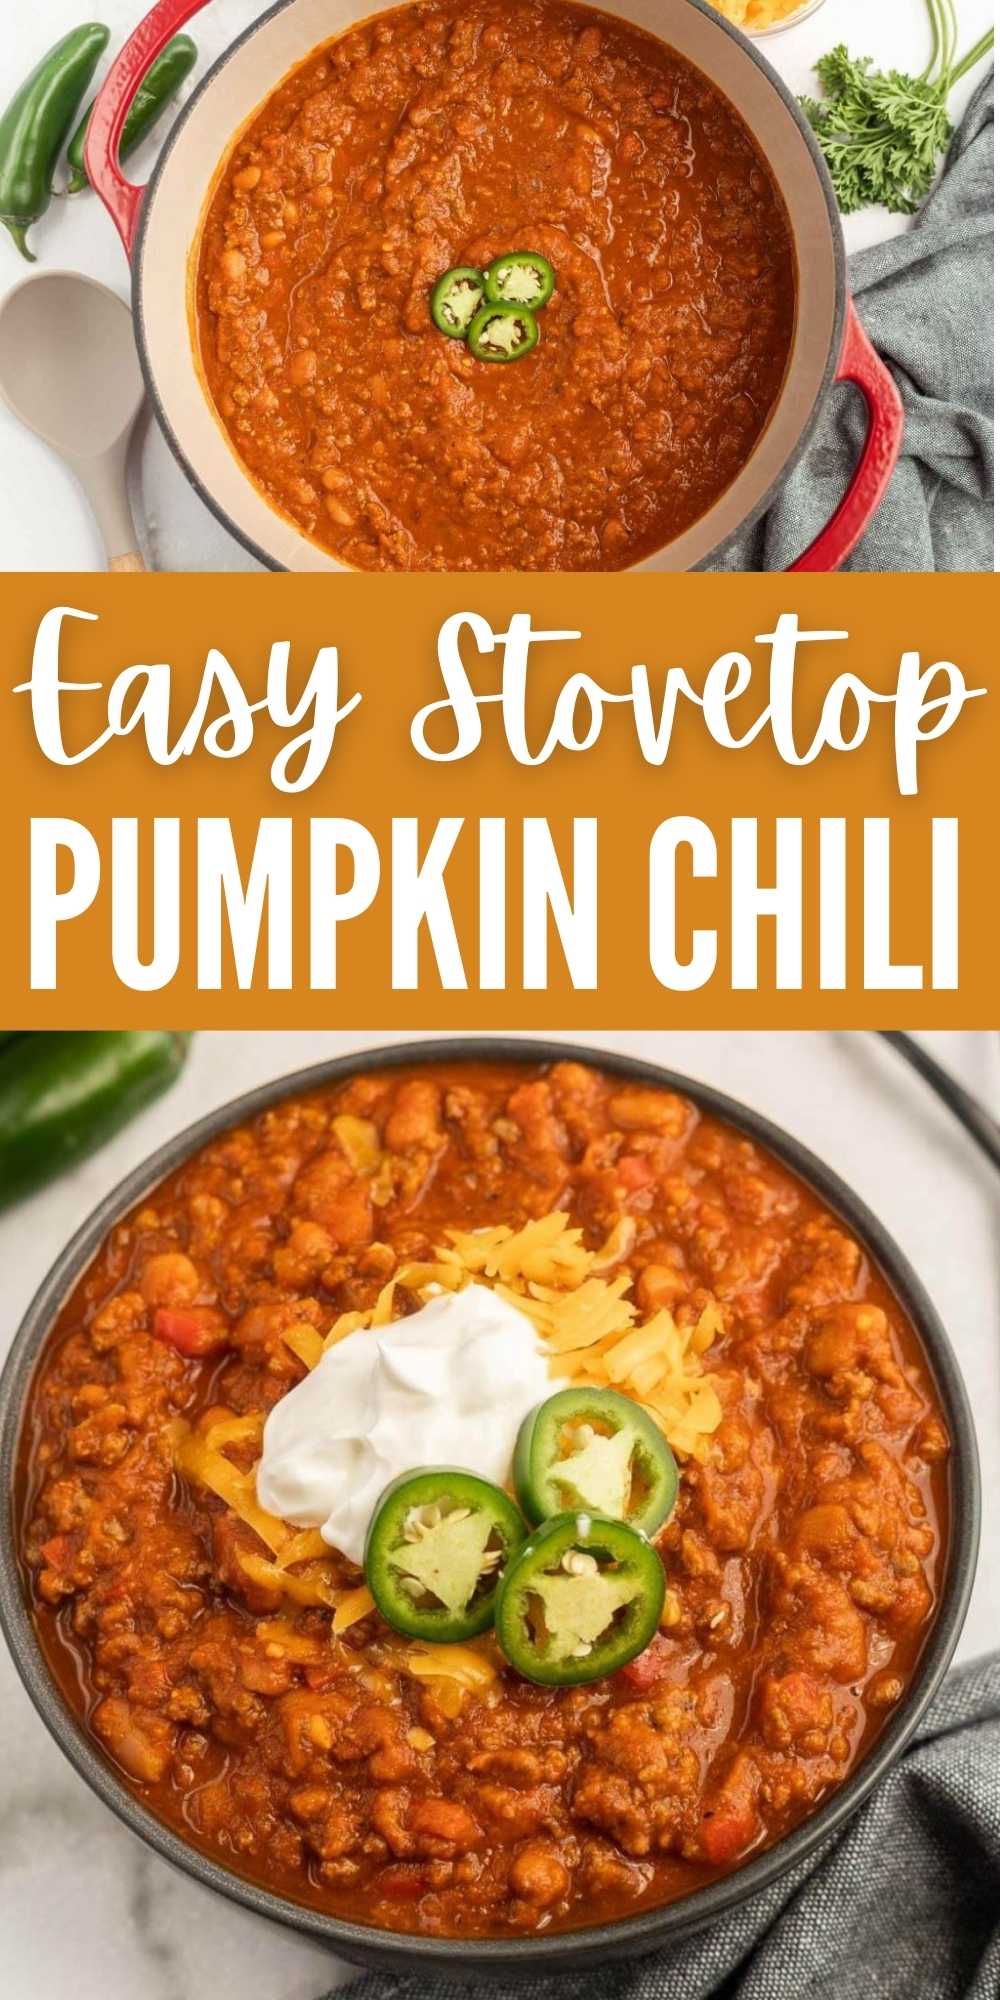 Pumpkin Chili recipe is a unique twist on the traditional chili. The secret is pumpkin puree and it adds the perfect hint of sweetness. This recipe is hearty and delicious. Easy to cook on your stove top or in the slow cooker. #eatingonadime #pumpkinchili #stovetoprecipes